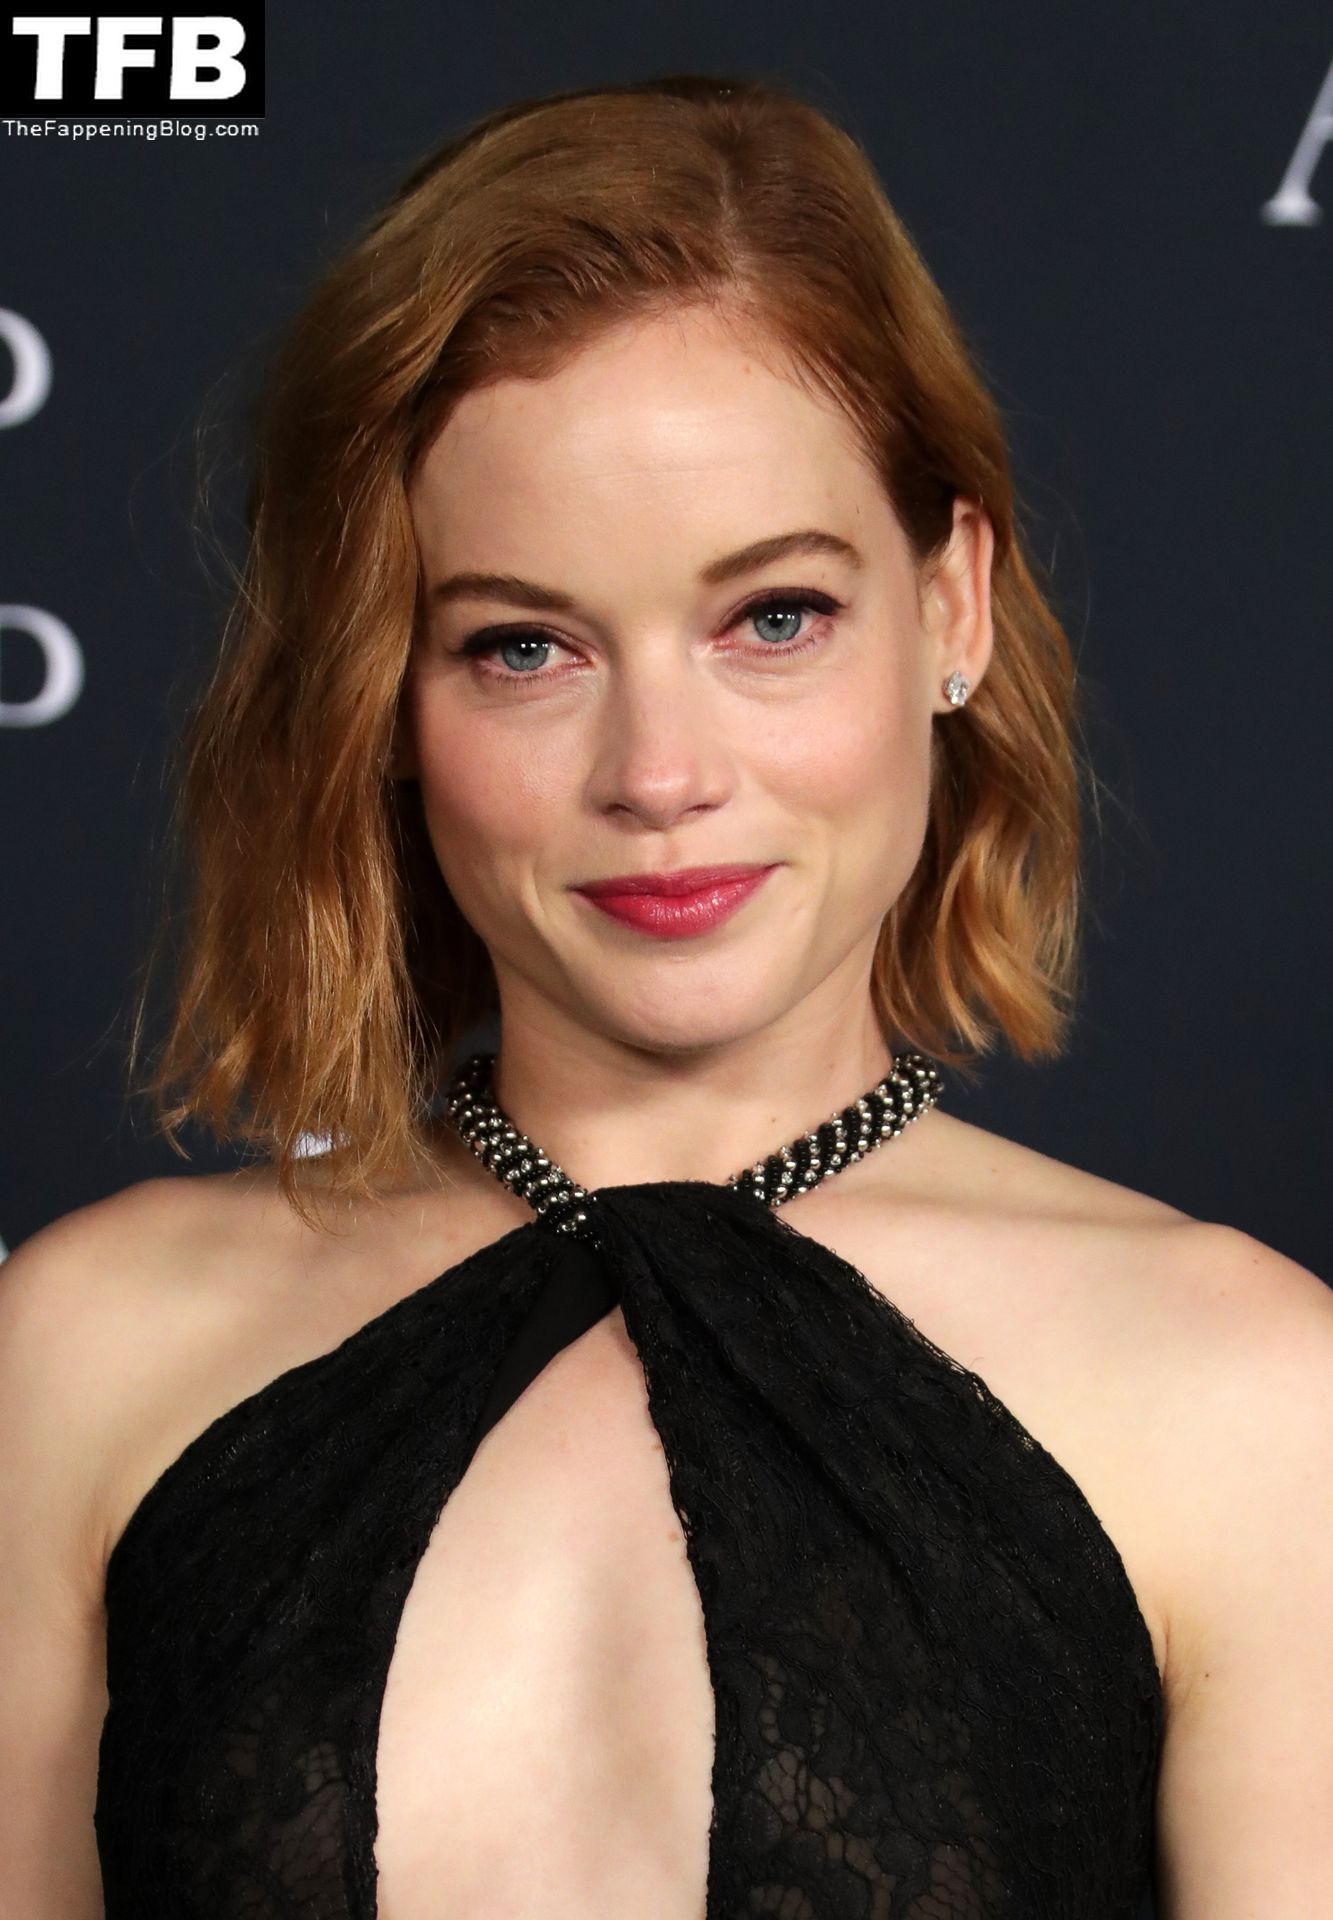 Jane-Levy-See-Through-The-Fappening-Blog-5.jpg